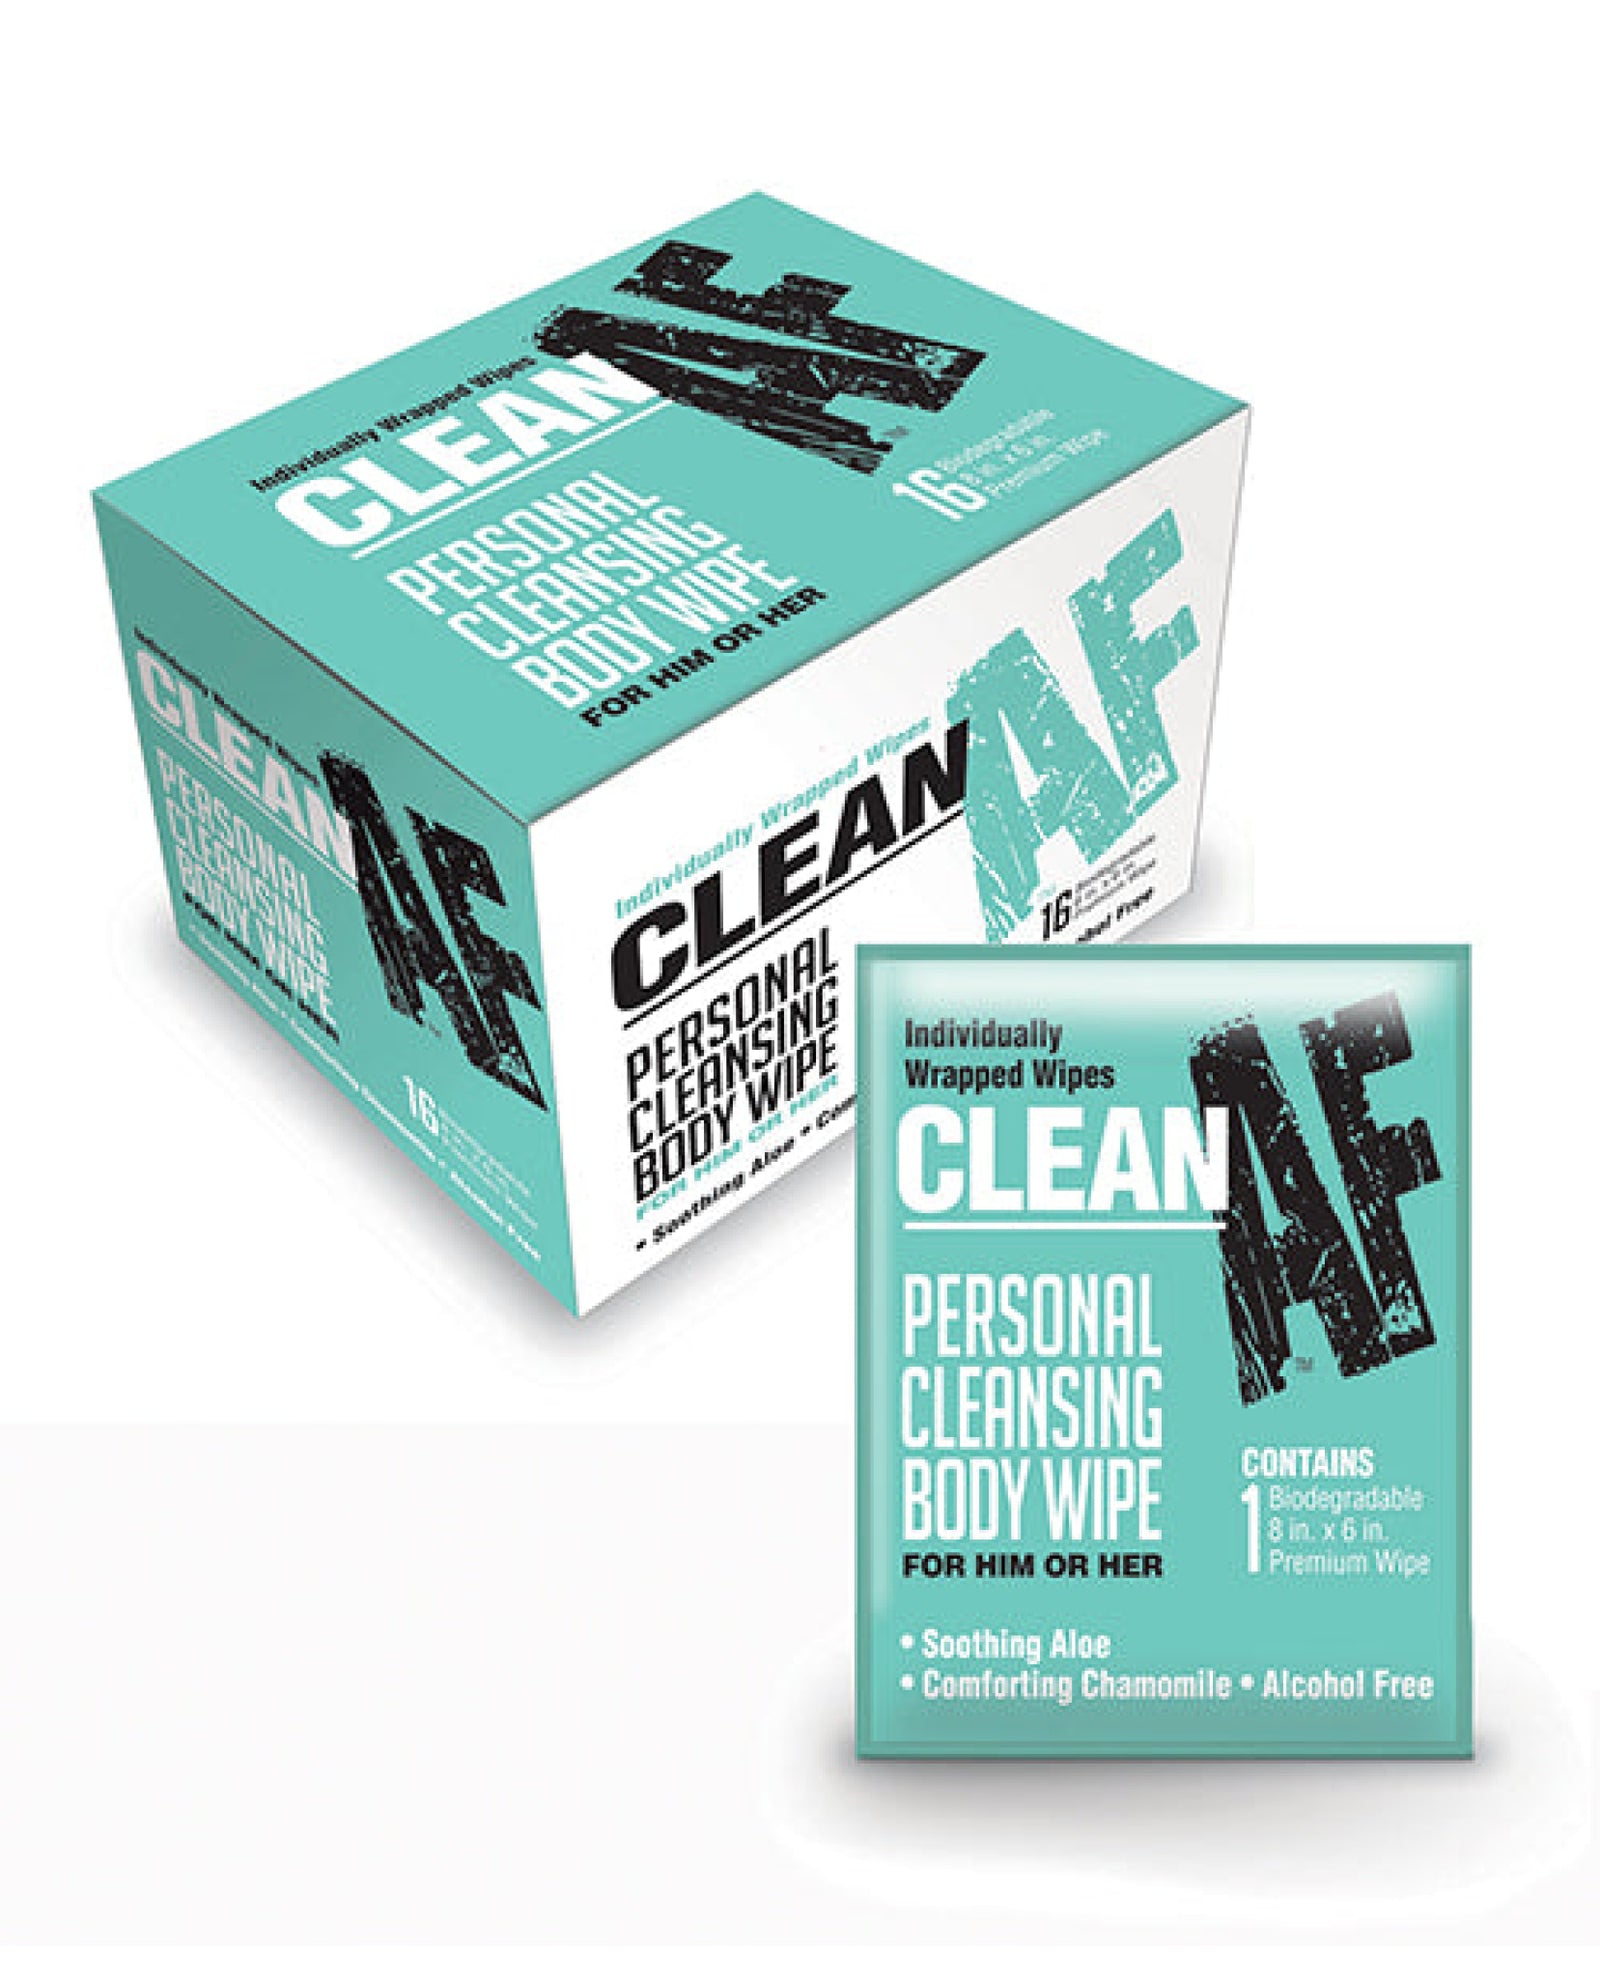 Clean Af Personal Cleansing Body Wipes - Box Of 16 Little Genie